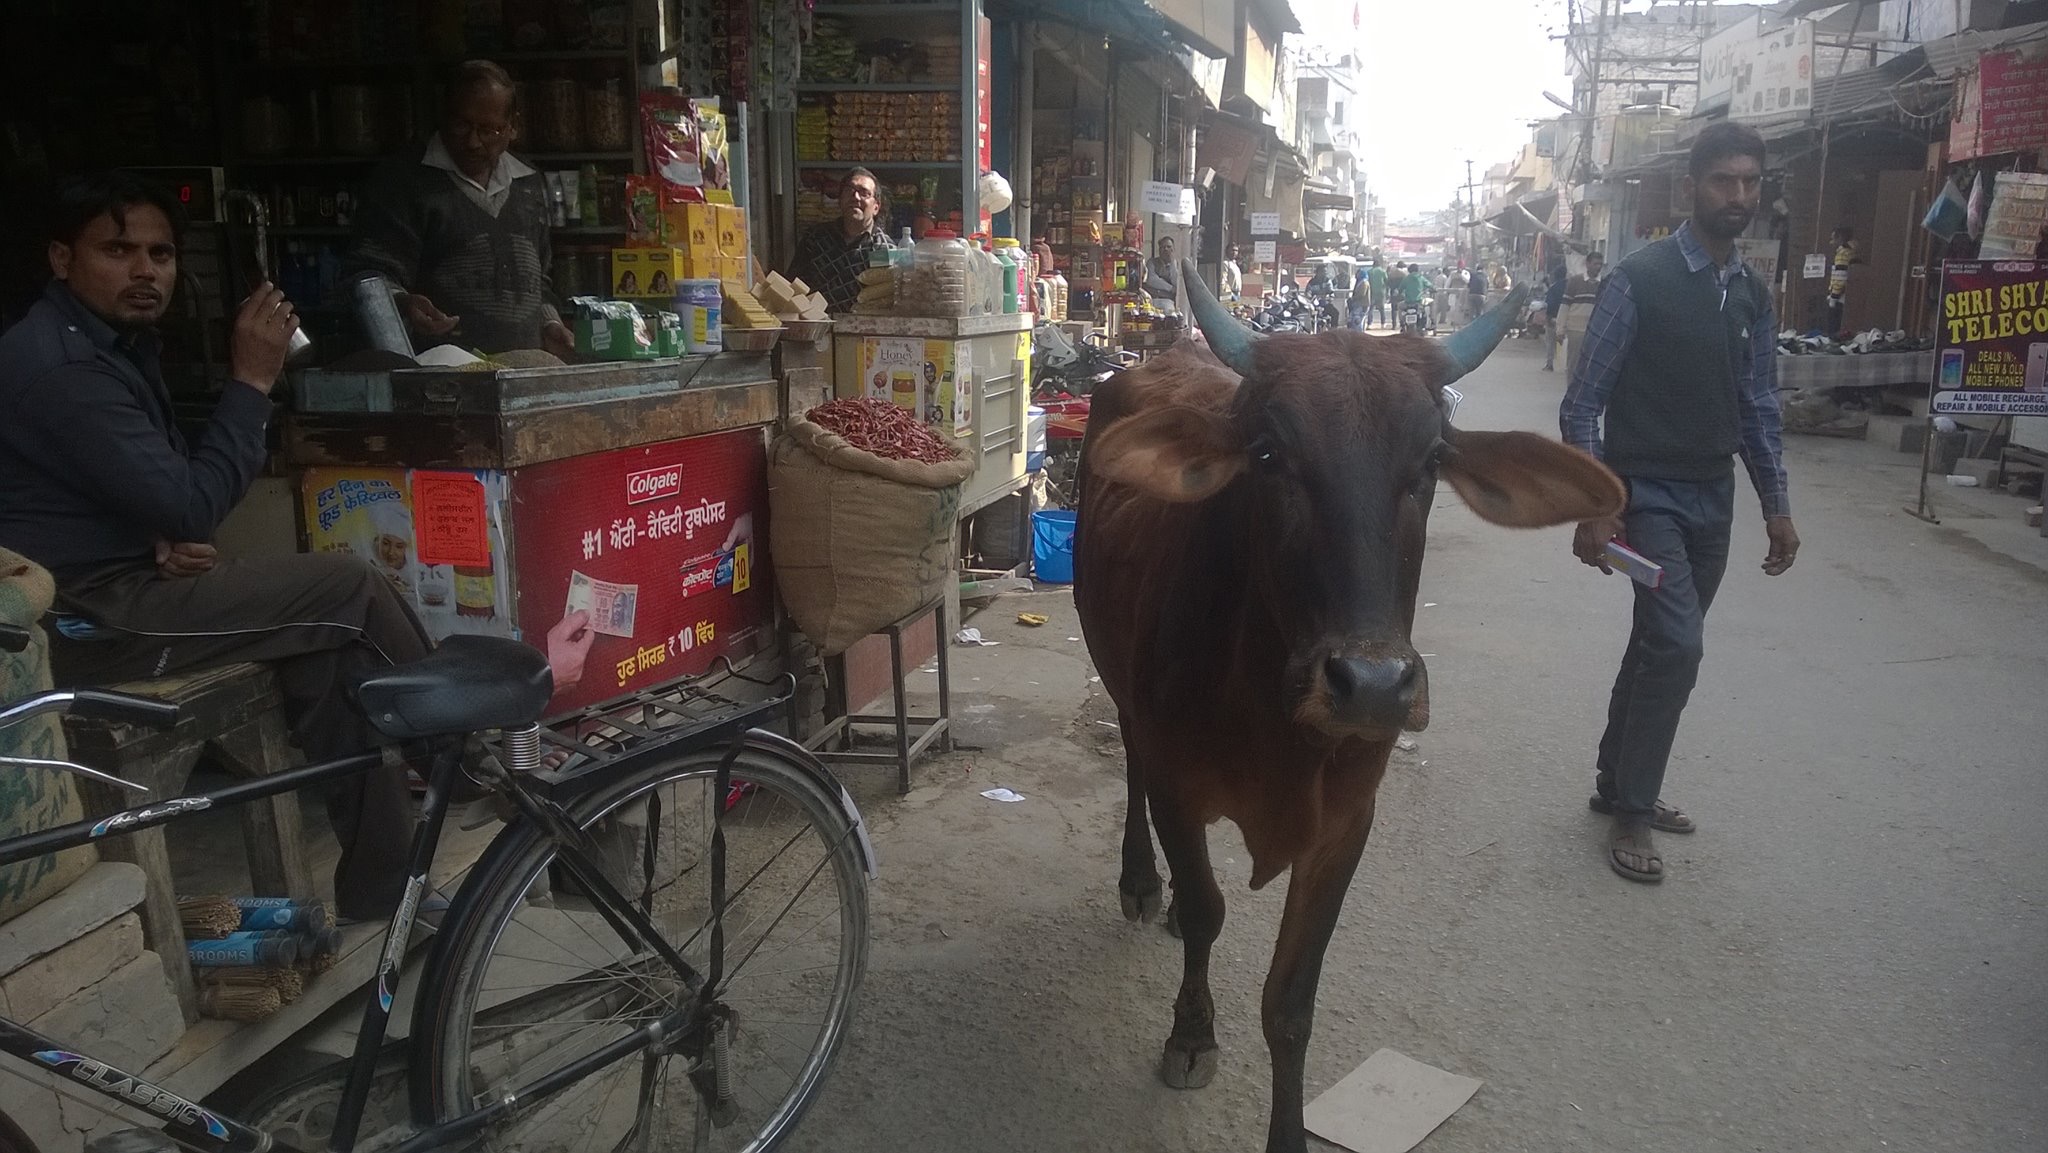 Cow in the Street